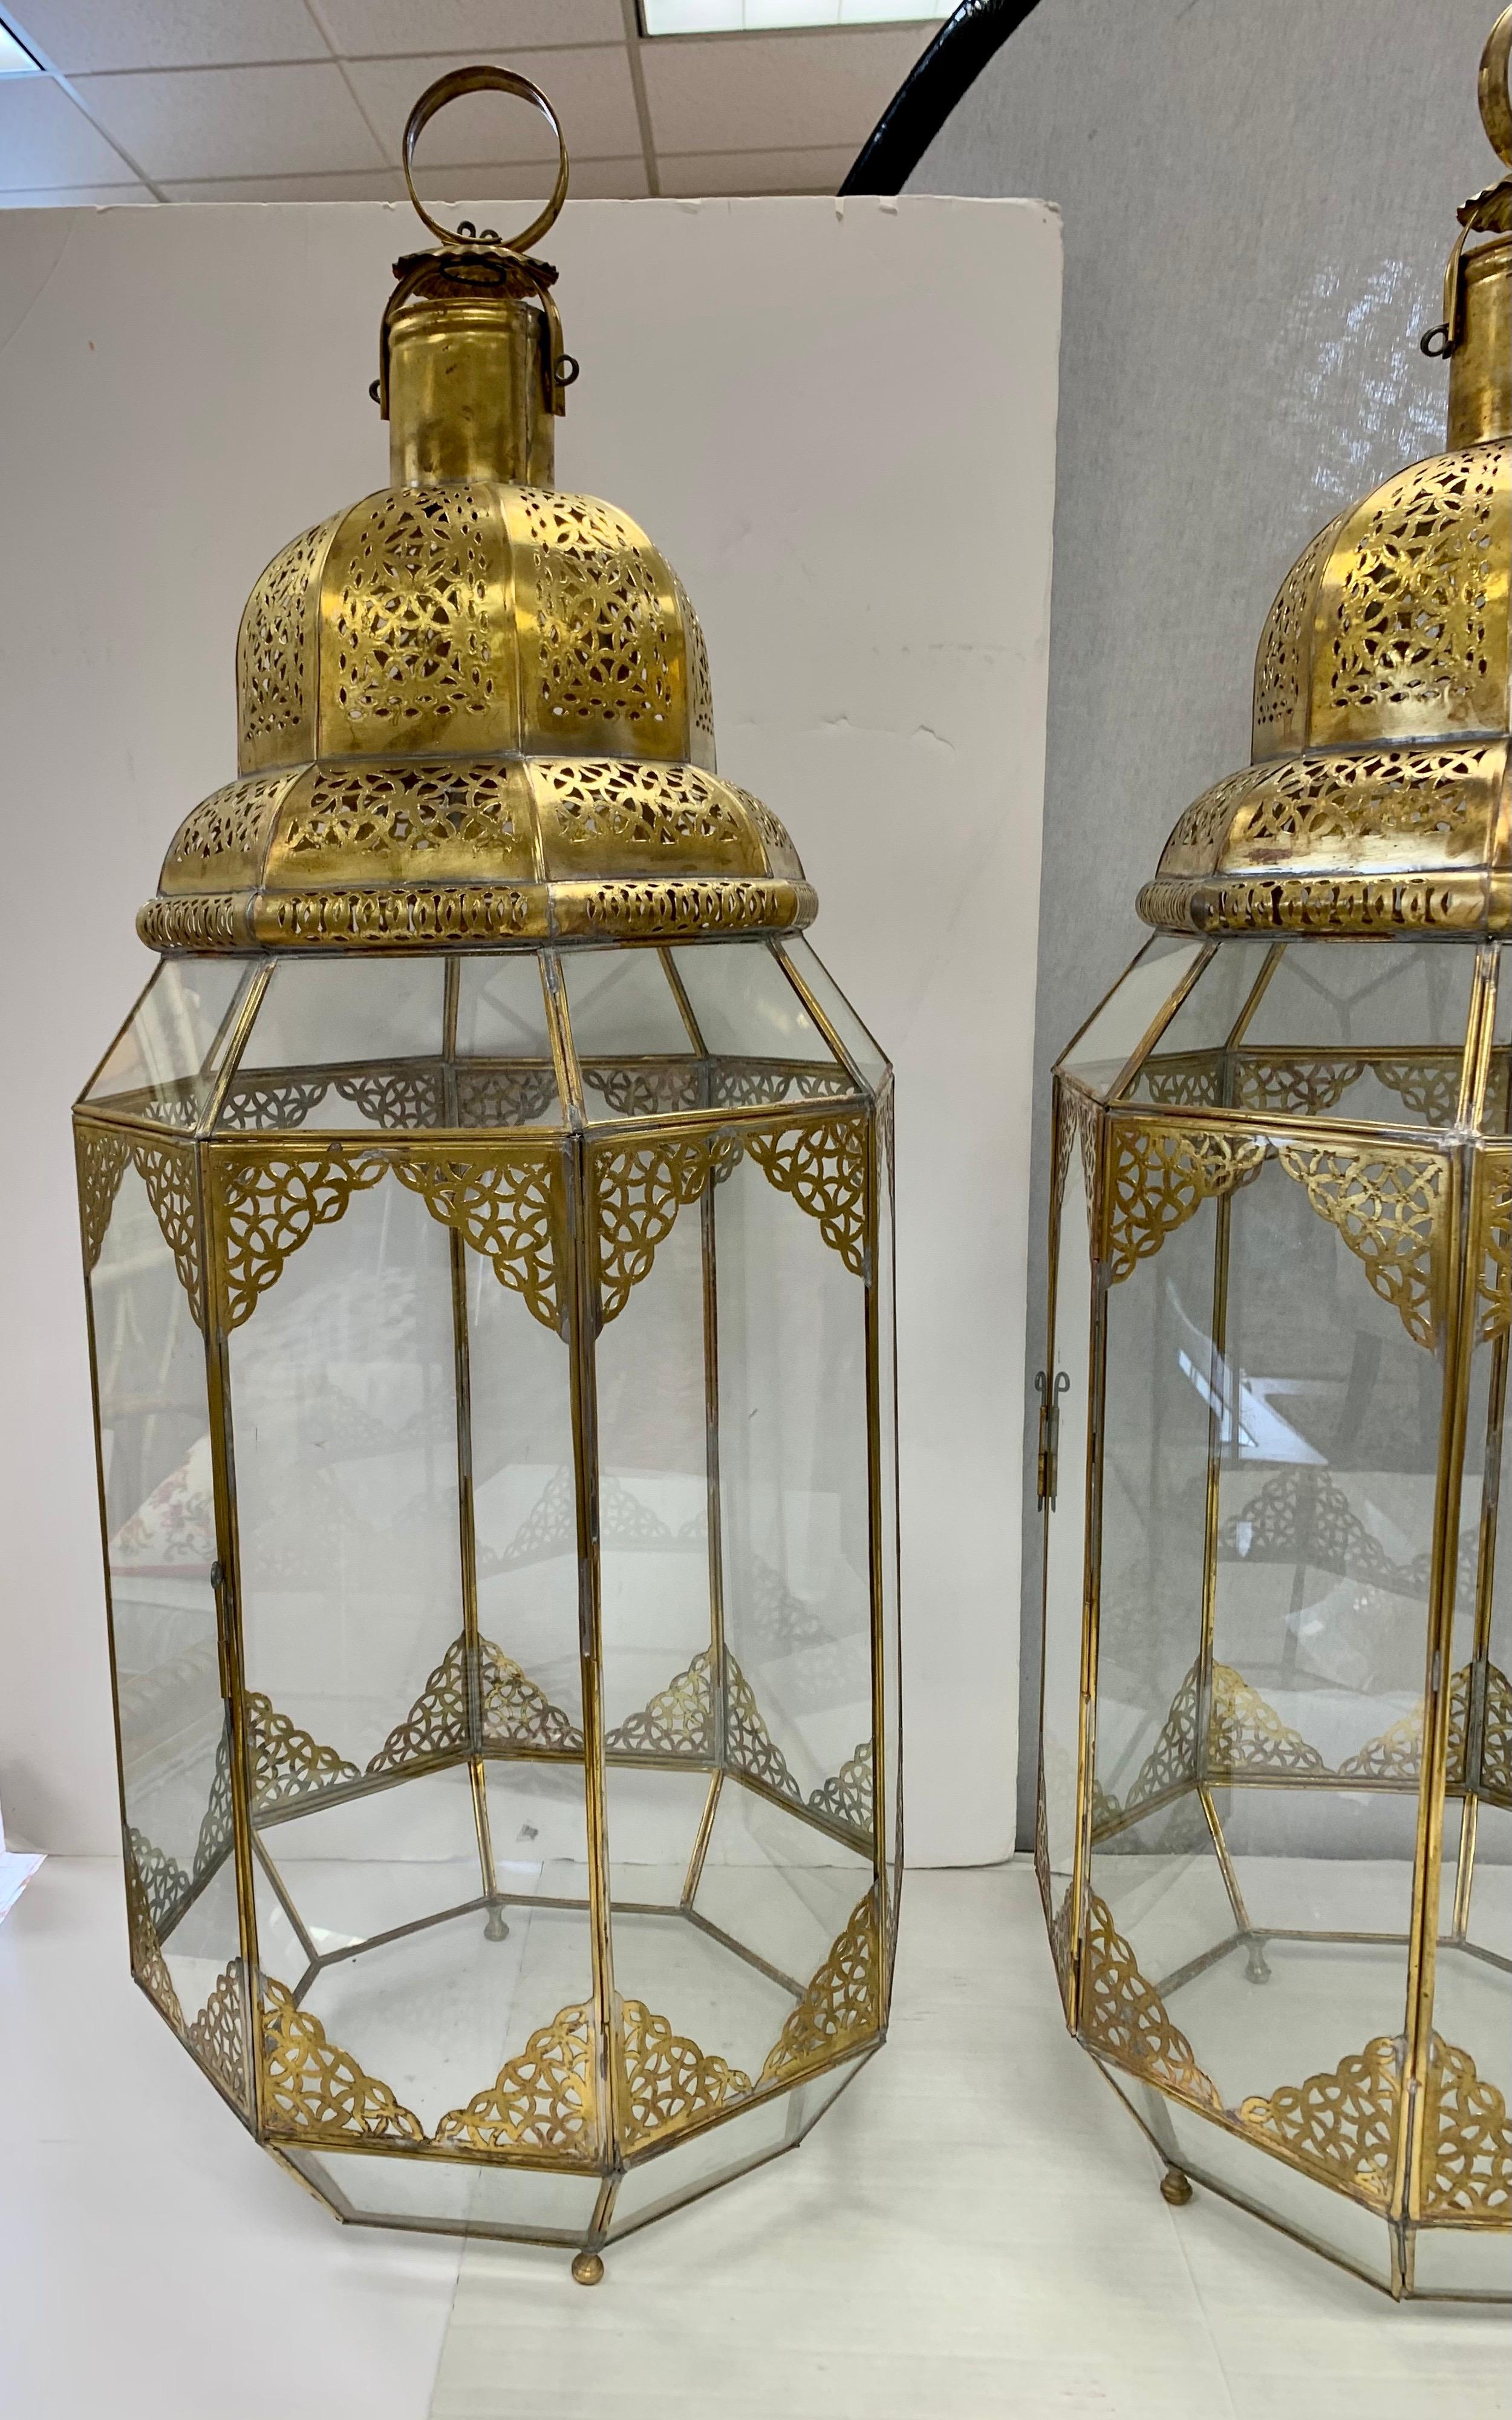 Exquisite Moorish brass and glass lanterns with beautiful intricate brass filigree have eight sides with one side having a door to access the inside. Handcrafted in Morocco in the 1990s. They can be used hanging from the ceiling, or sitting on a